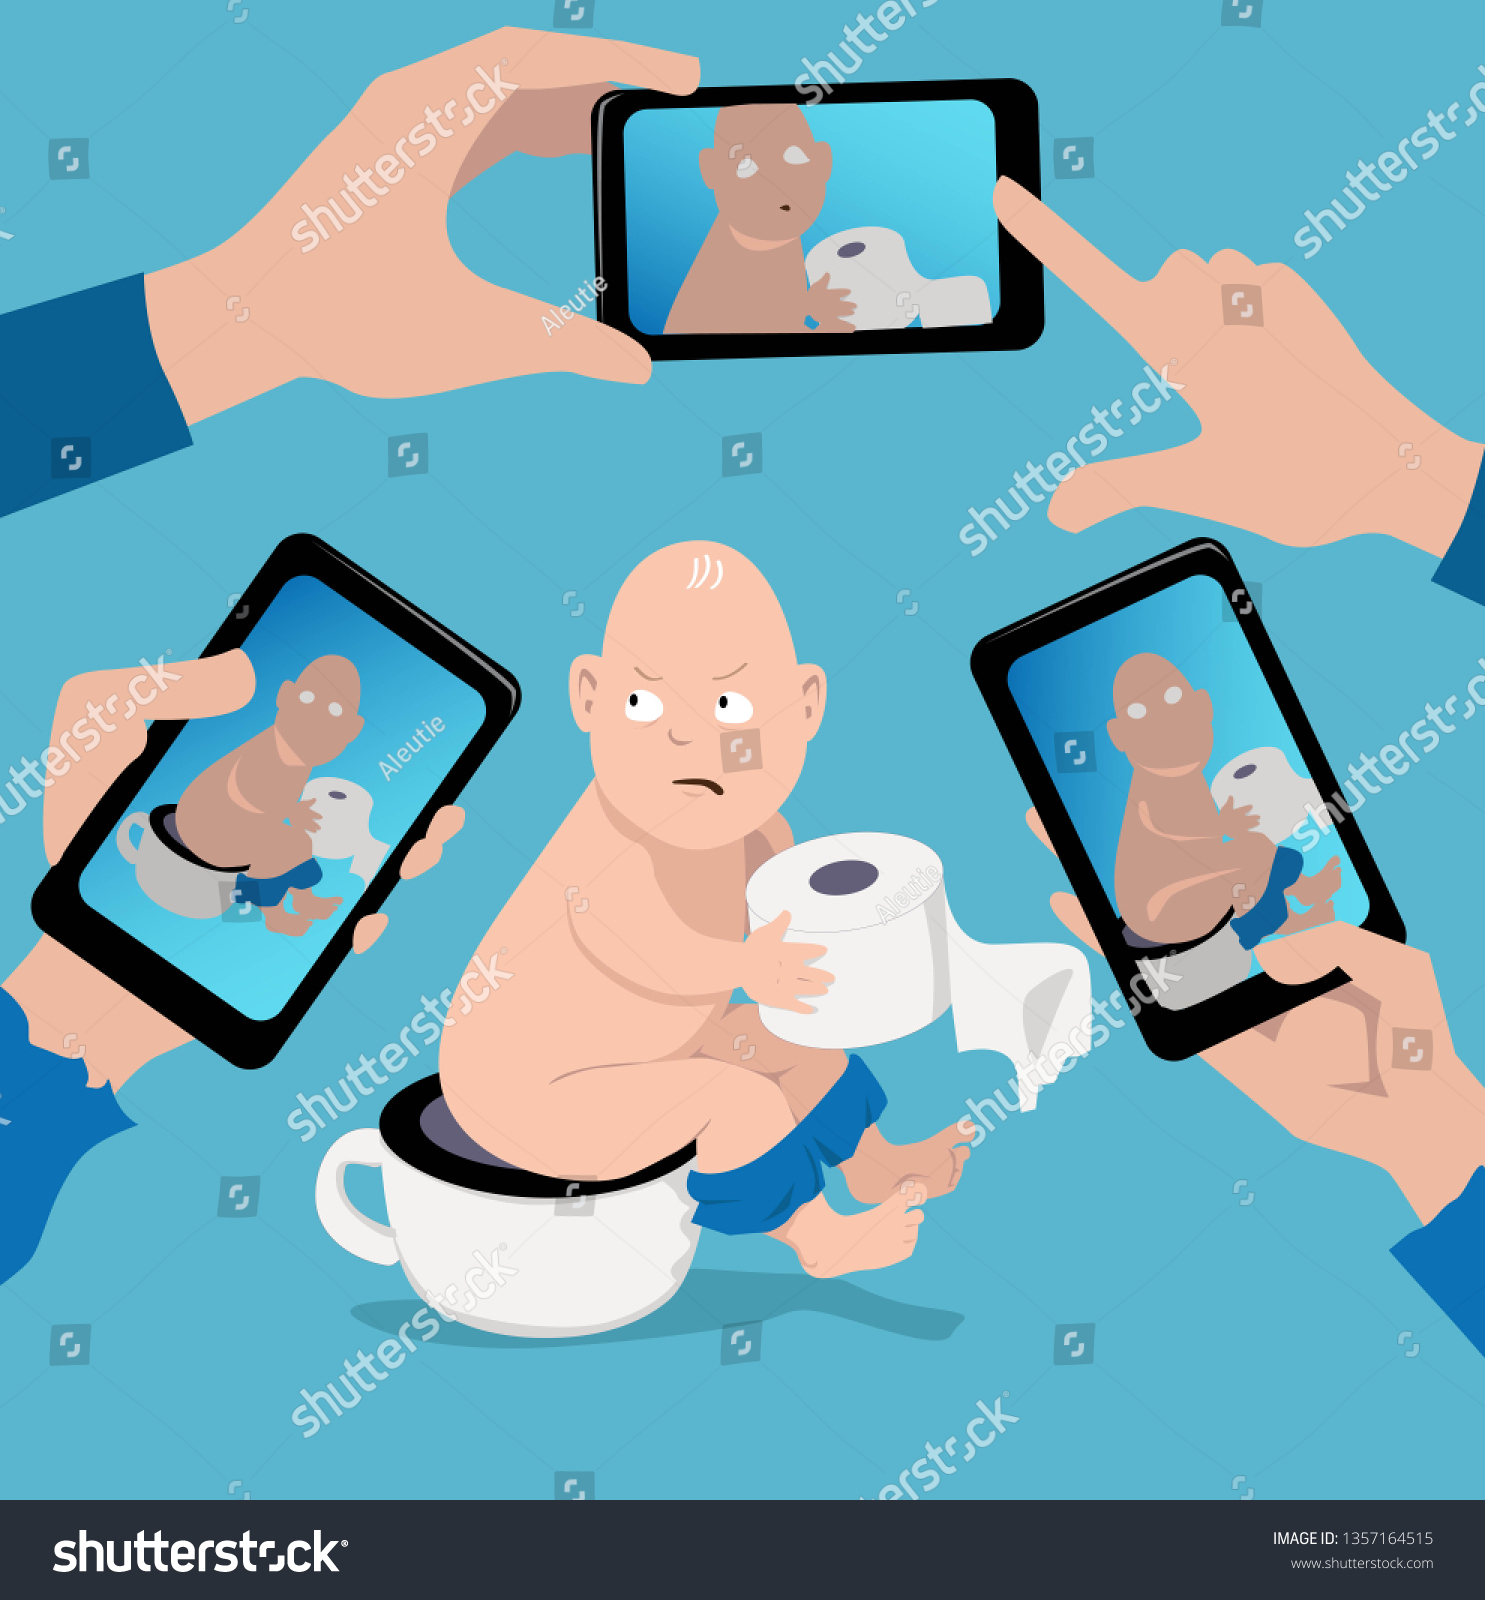 SVG of Upset baby sitting on a potty, multiple smartphones sharing his photo on-line, EPS 8 vector illustration svg